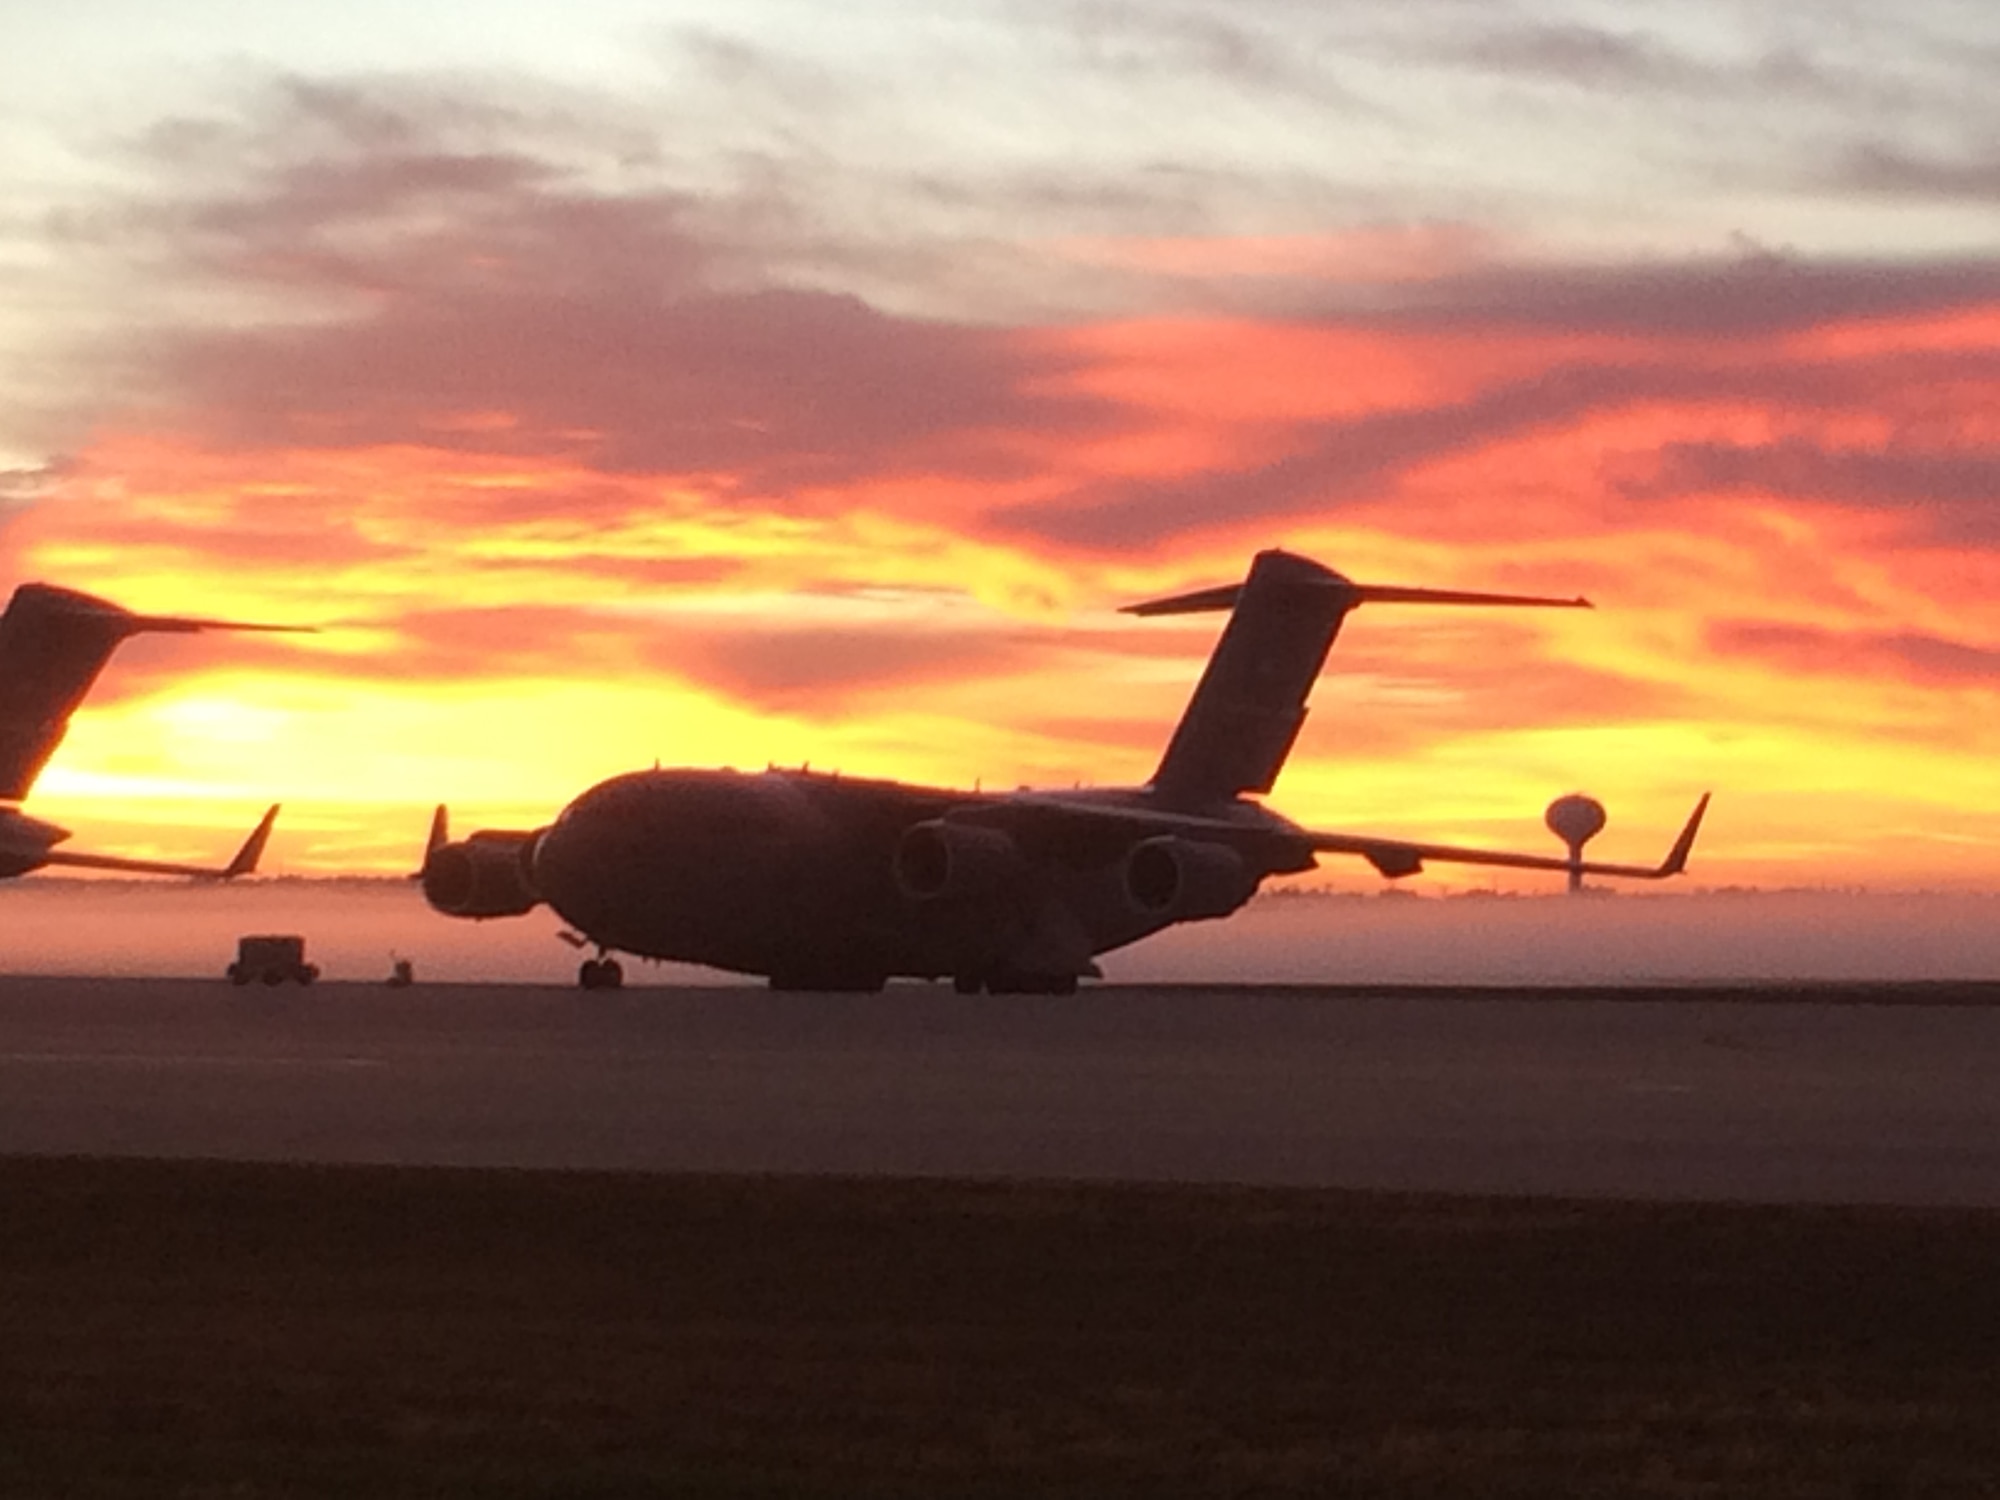 WRIGHT-PATTERSON AIR FORCE BASE, Ohio – The early morning sunrise and background fog highlights a 445th Airlift Wing C-17 Globemaster III sitting on the ramp at Wright-Patterson Air Force Base, Ohio Oct. 6, 2015. The fall temperature mixed with moisture in the air caused a blanket of fog to highlight the beauty of the aircraft. (U.S. Air Force photo/Master Sgt. Brock Felgenhauer)